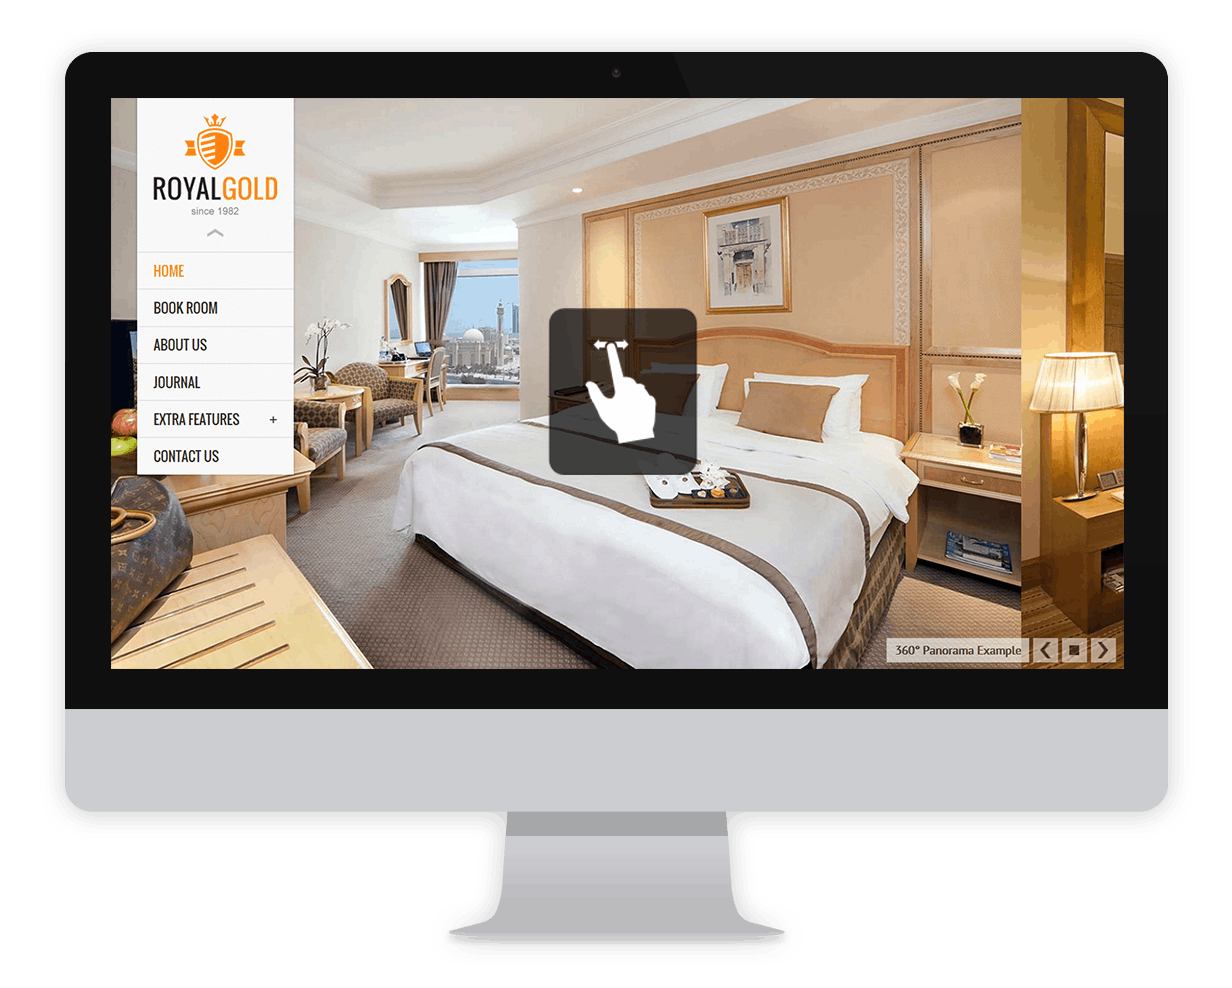 RoyalGold - A Luxury & Responsive Hotel or Resort Theme For WordPress - 1